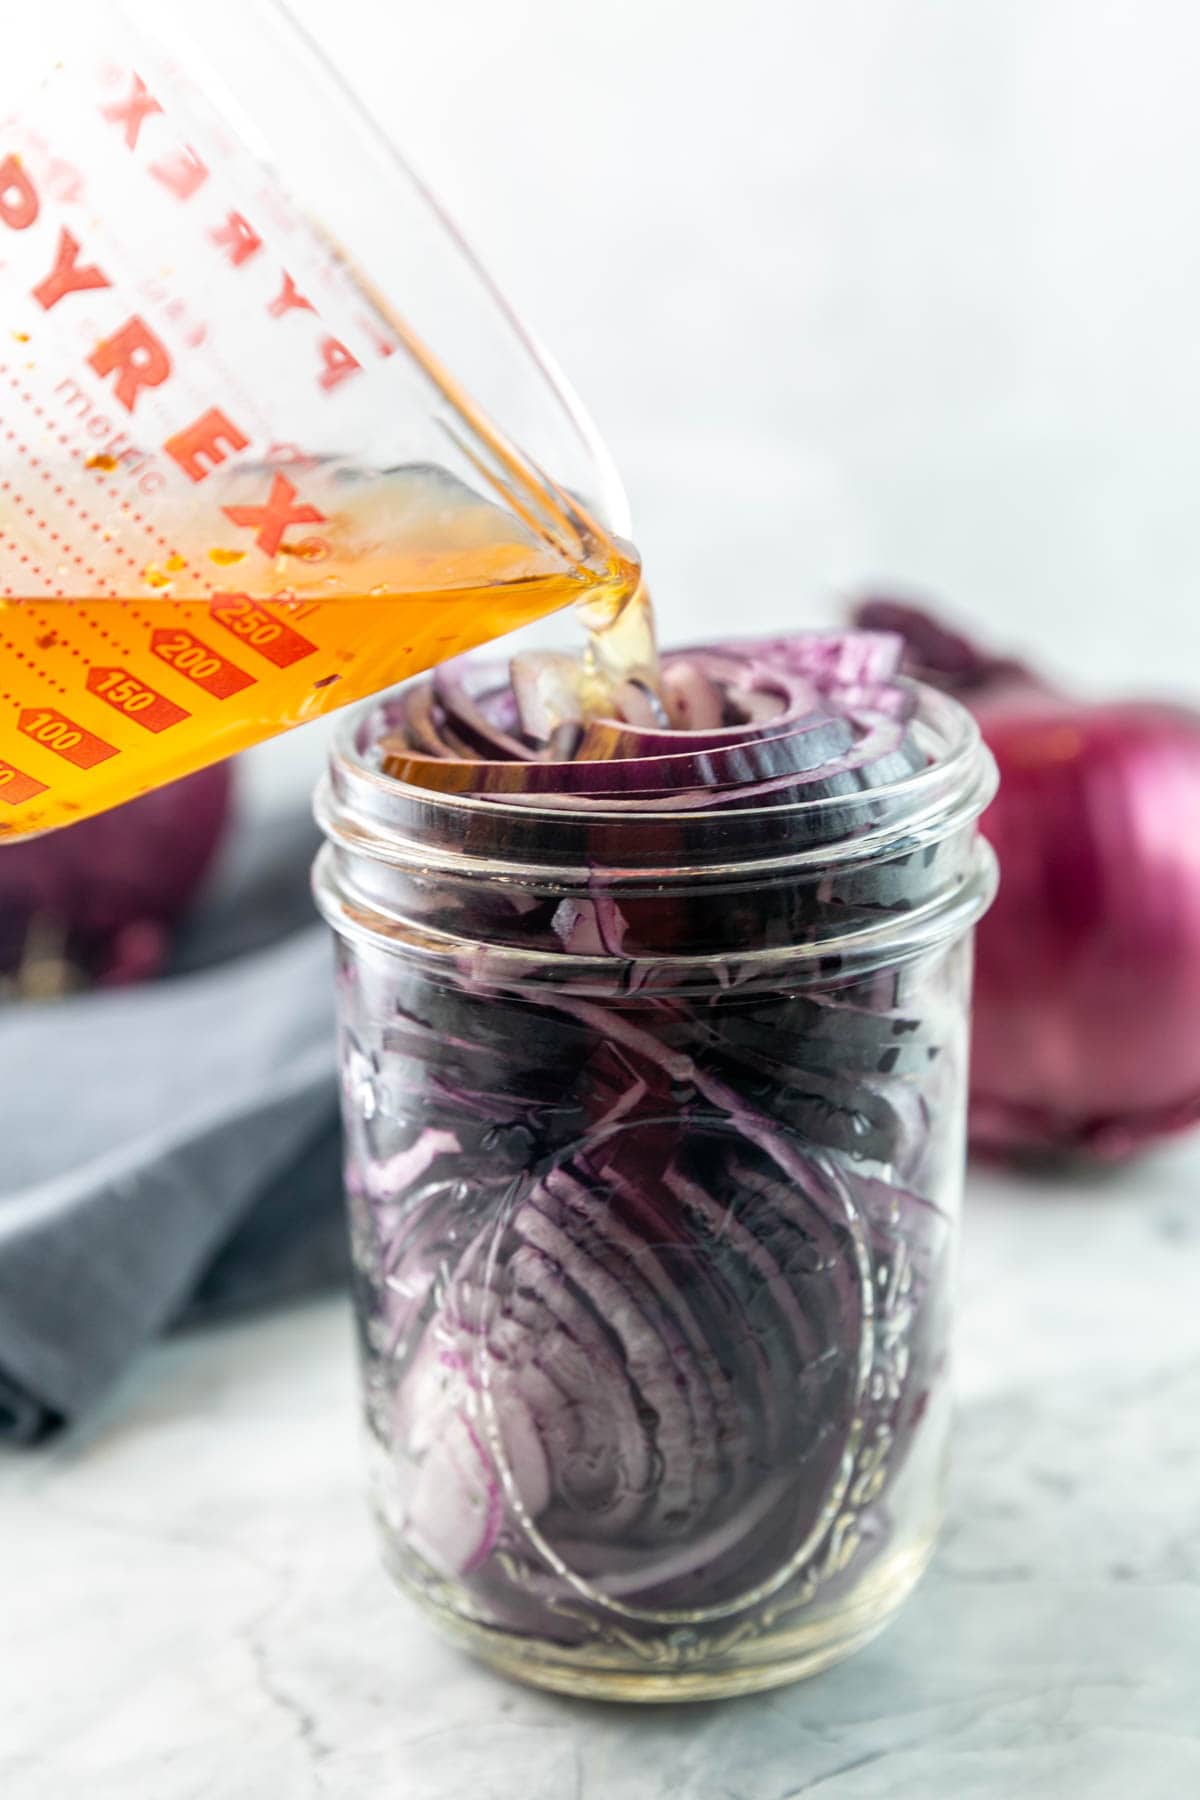 pouring the brining solution into a jar filled with thinly sliced red onions